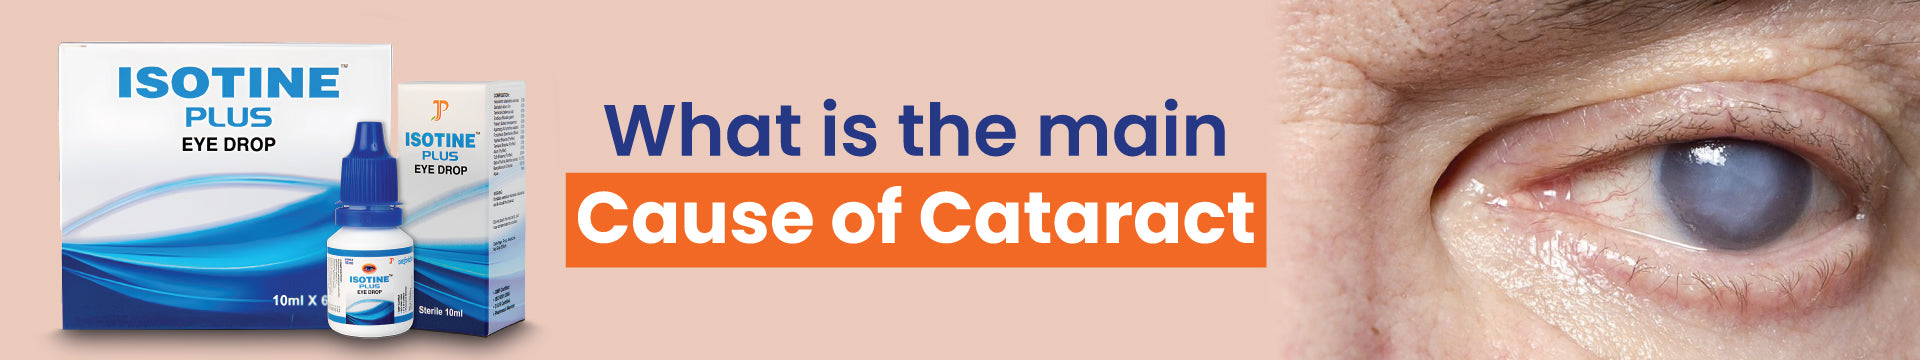 What is the main cause of Cataract?